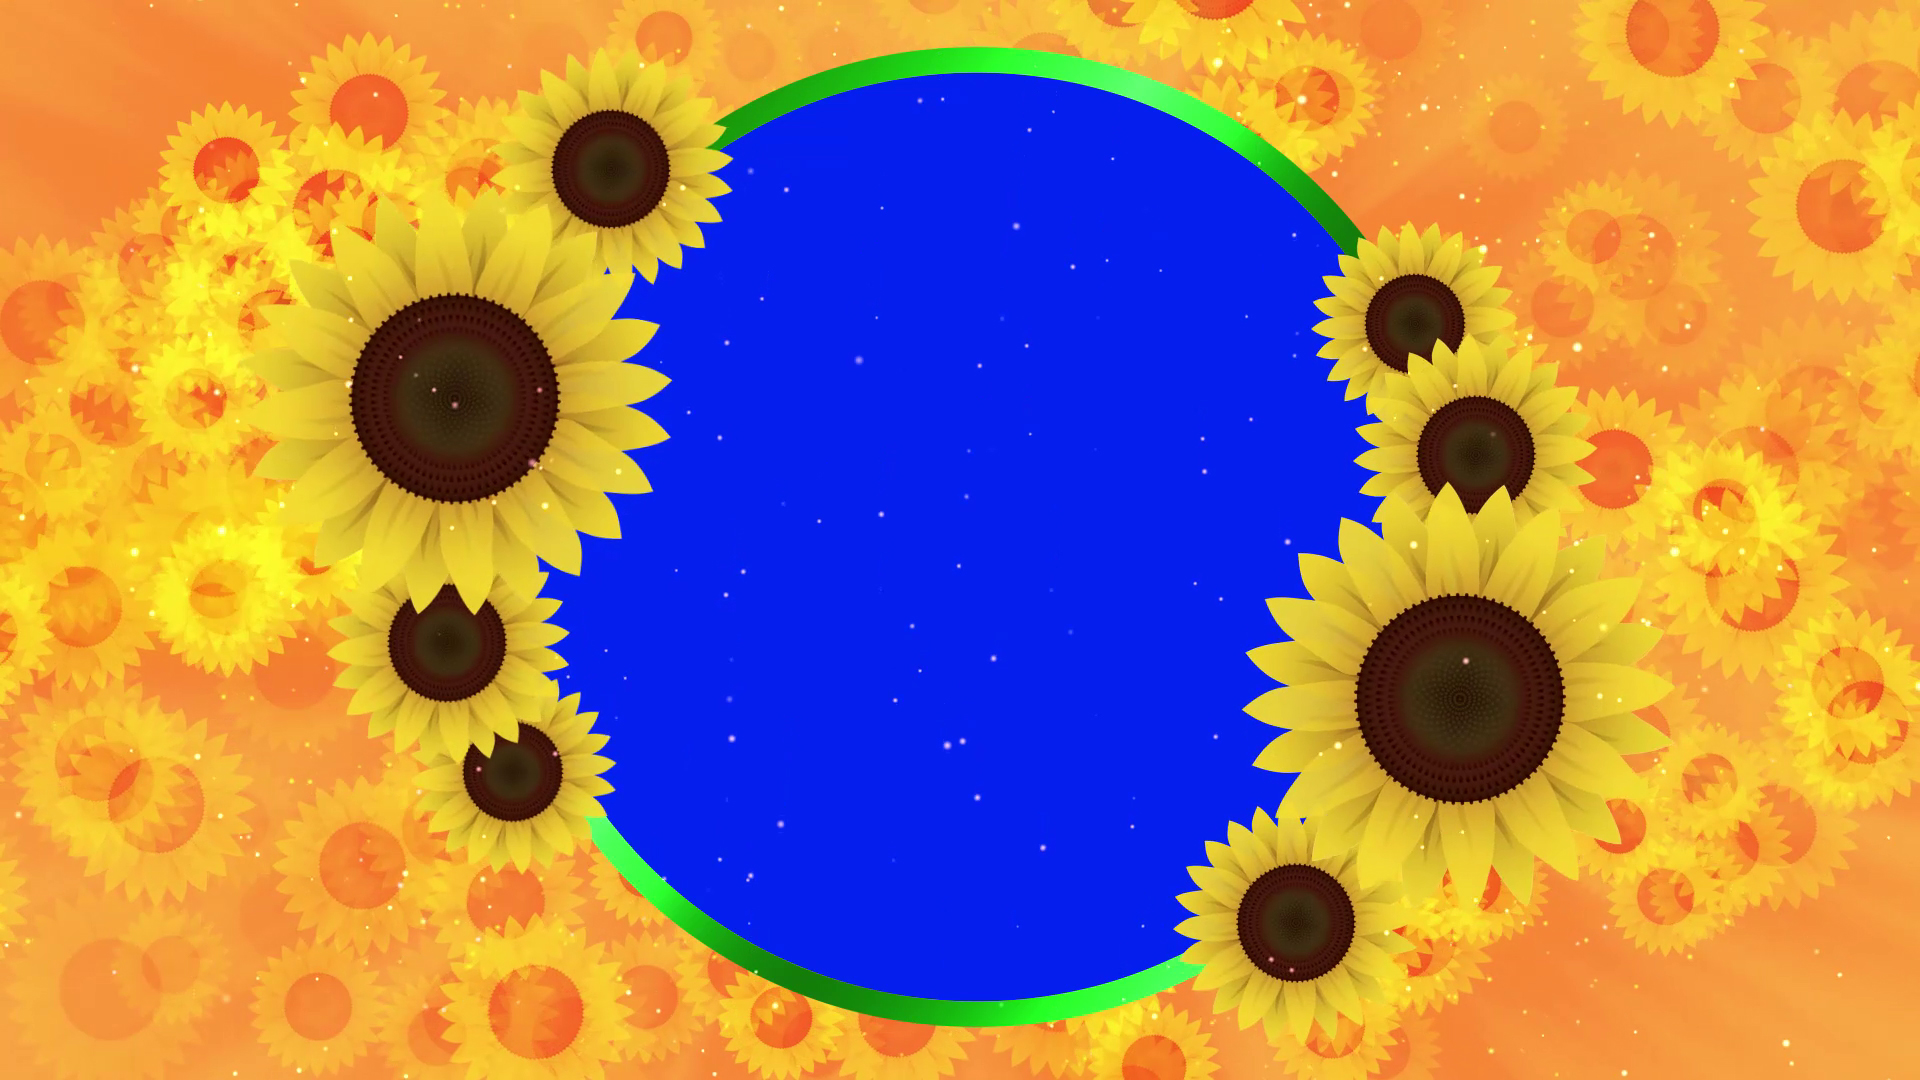 Wedding Frame Free Download-New Sunflowers Wedding Frame Animation in Blue  Screen Video Effects | All Design Creative